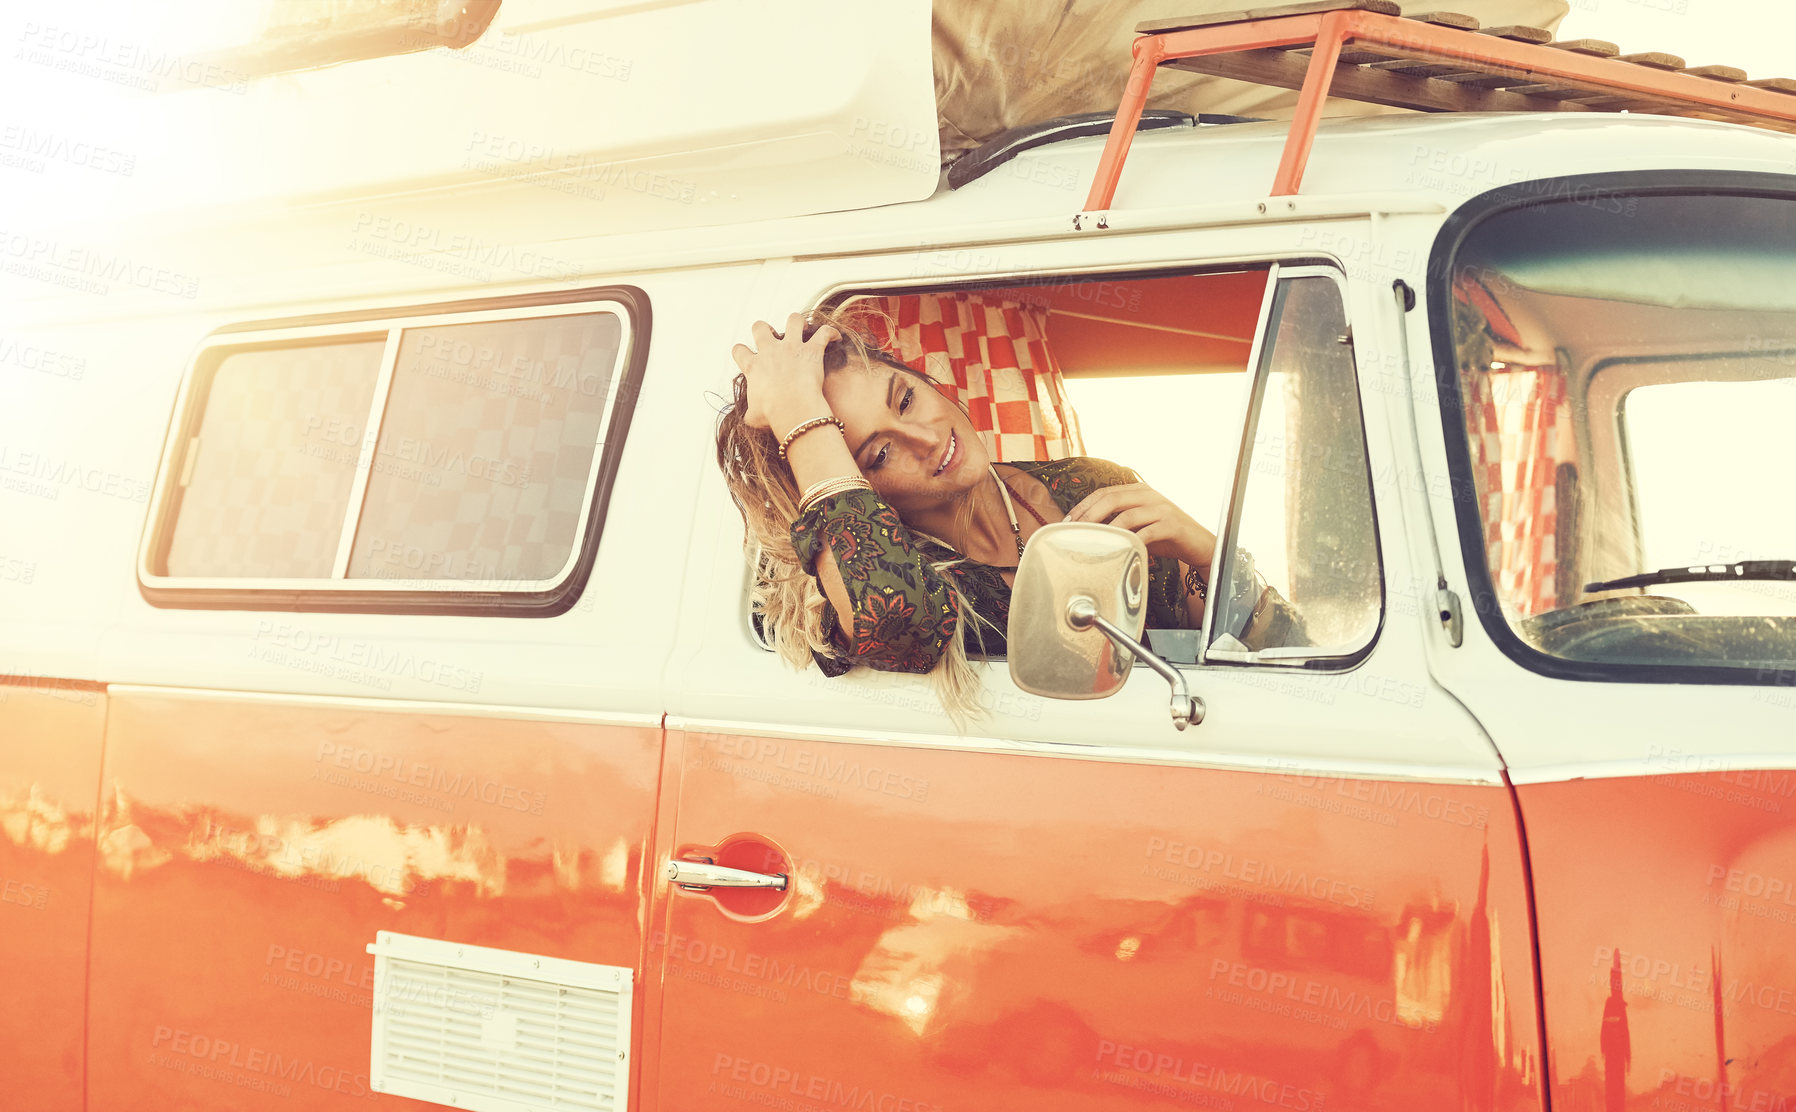 Buy stock photo Shot of a gorgeous young woman enjoying a roadtrip on her own